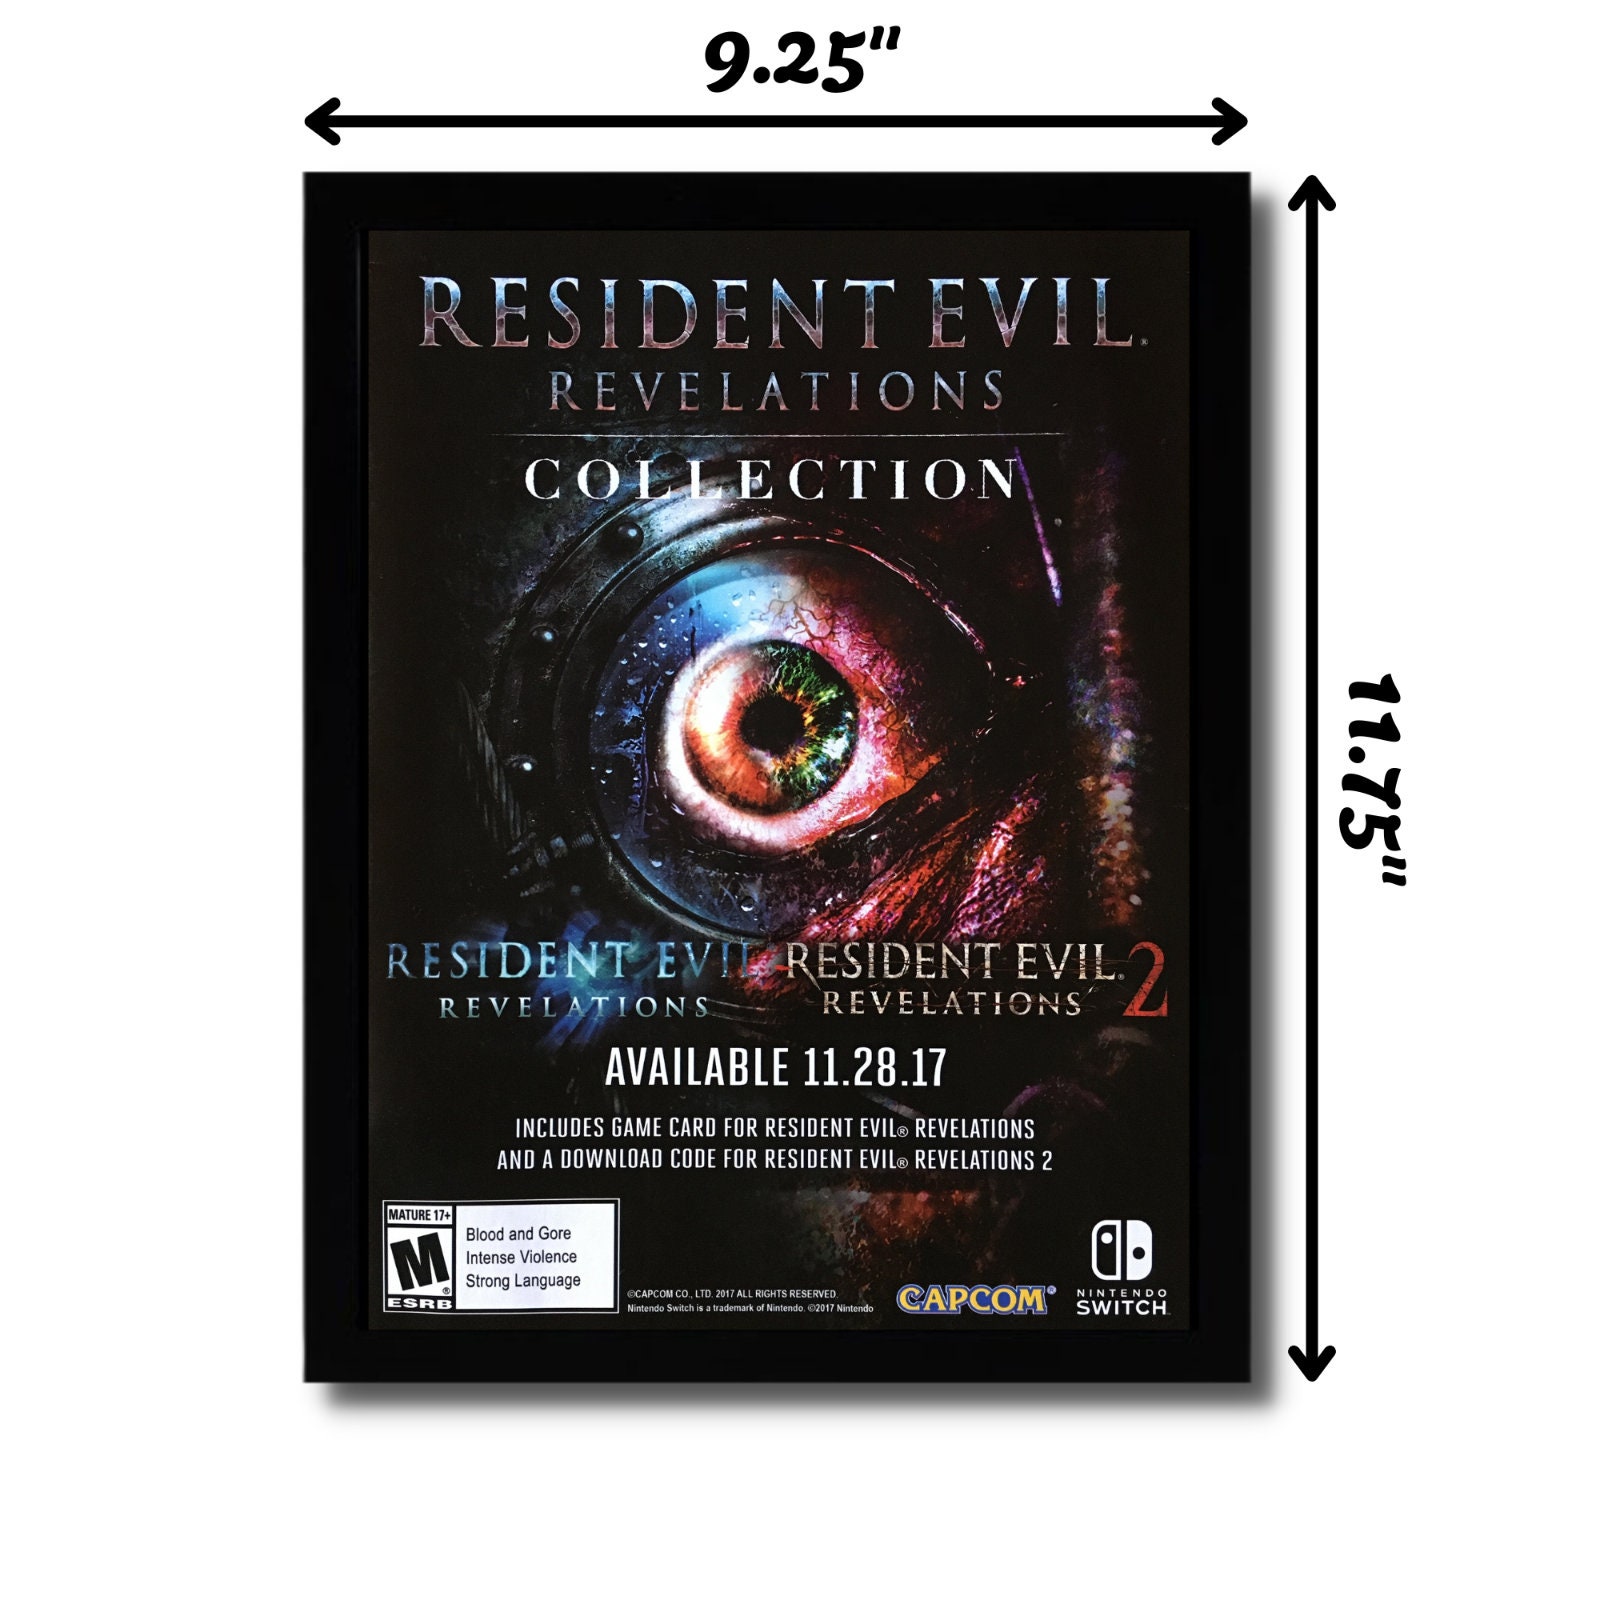 Resident Evil Revelations Collection - Nintendo Switch, Nintendo Switch